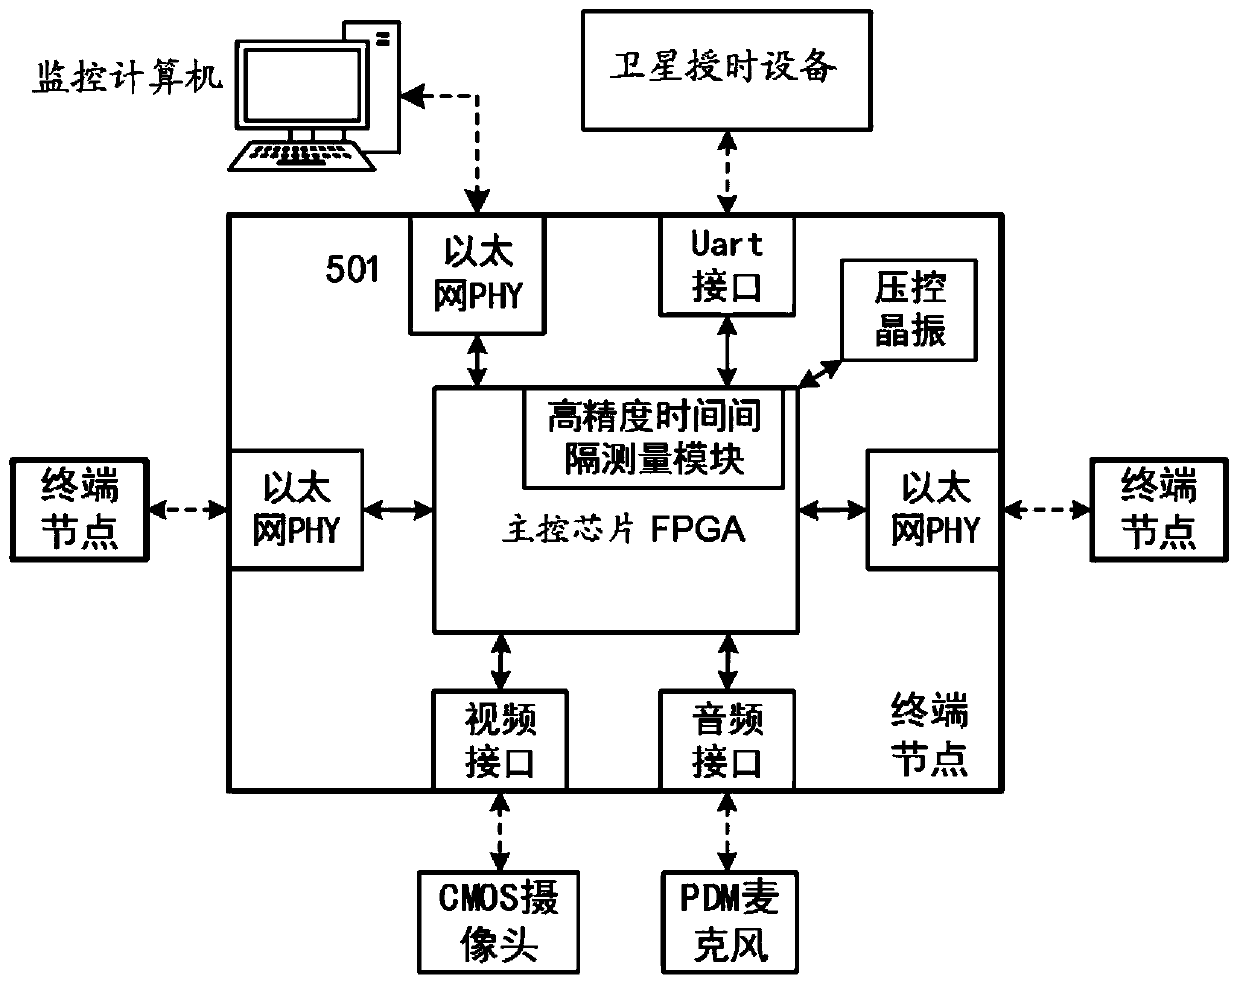 Multi-node audio and video information synchronous sharing display method